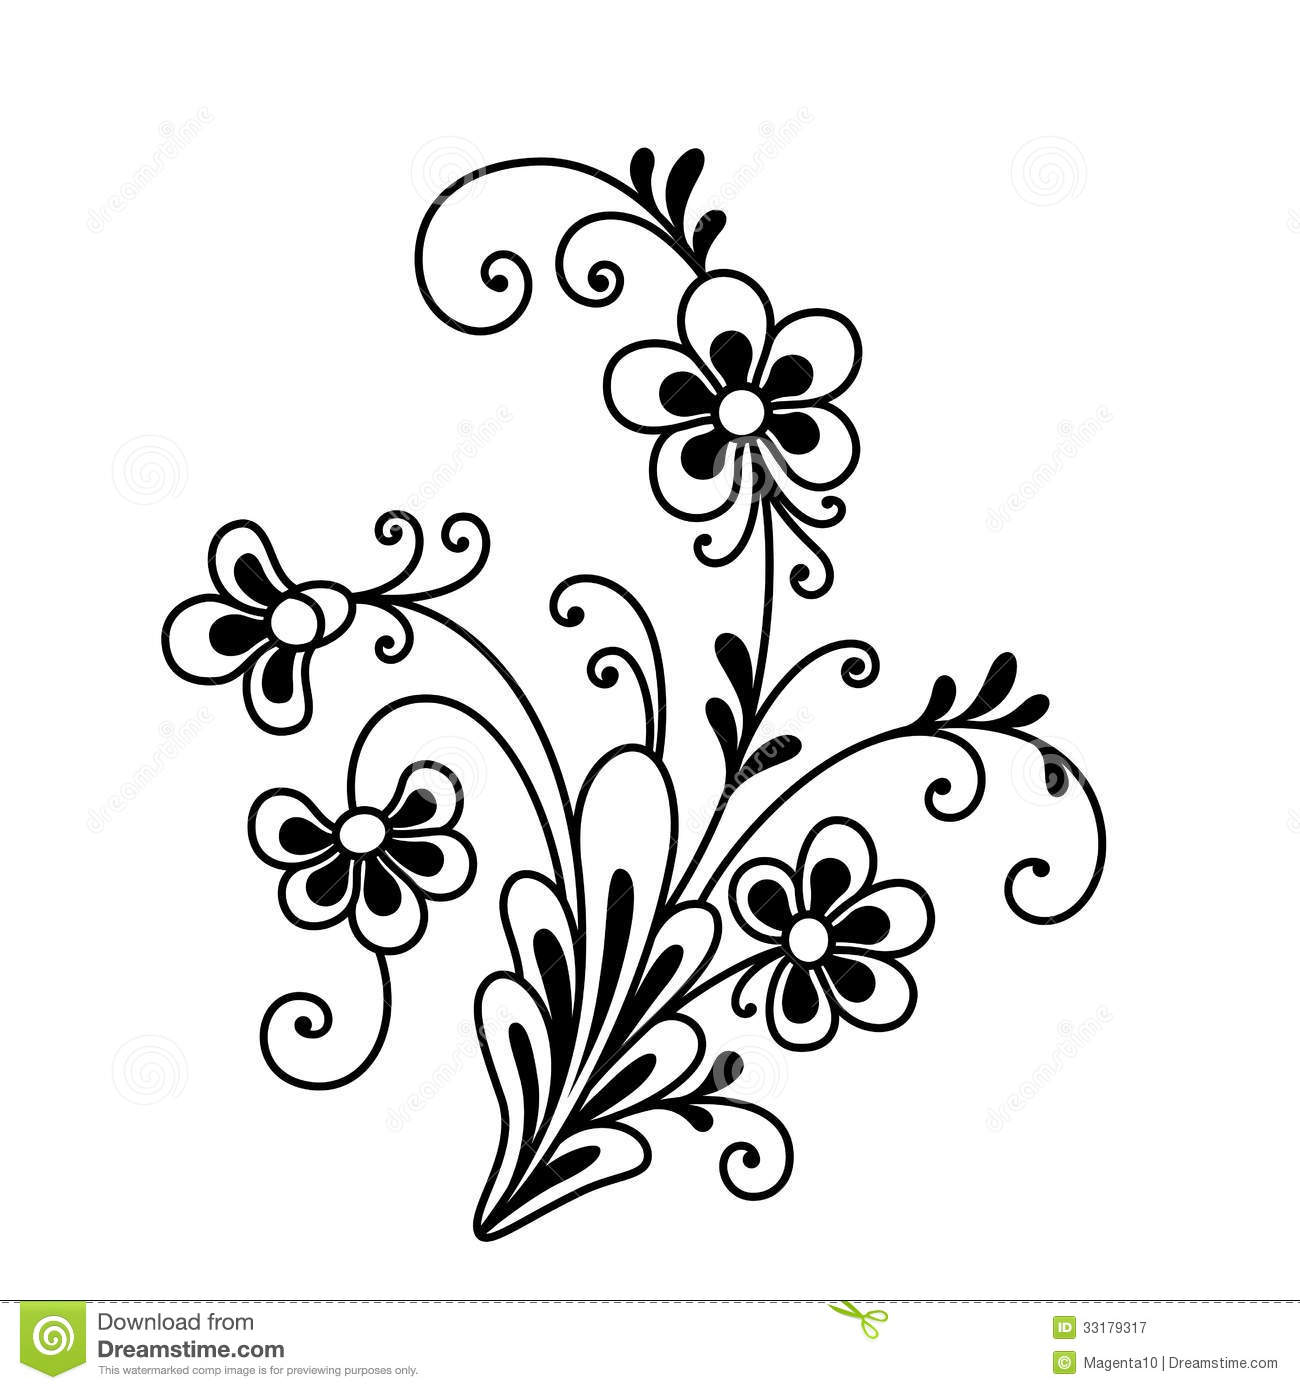 Bunch Of Flowers Floral Design Element